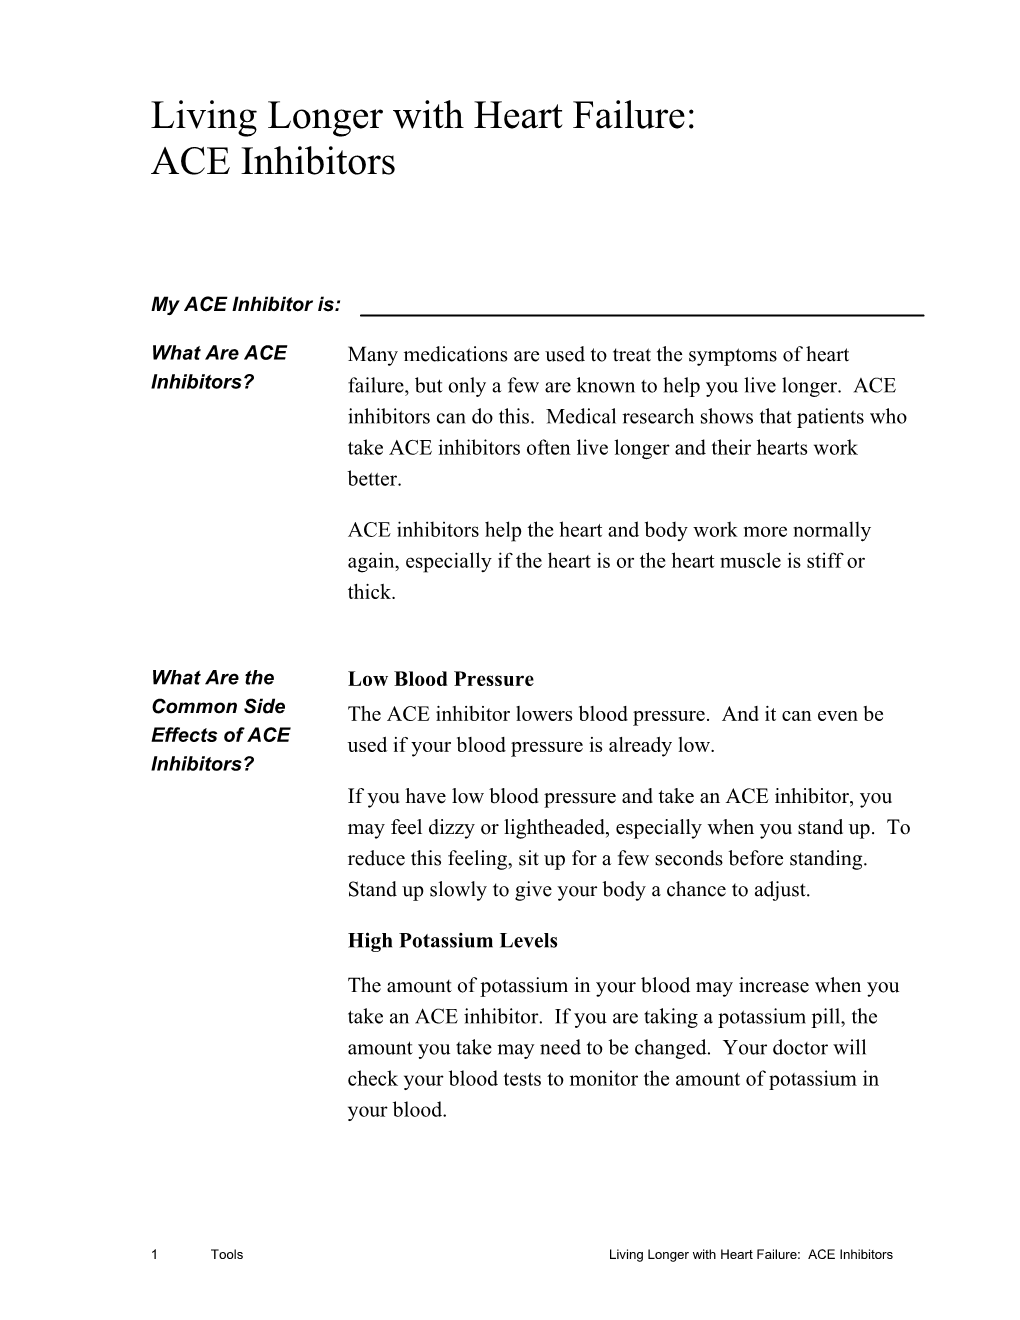 1Toolsliving Longer with Heart Failure: ACE Inhibitors